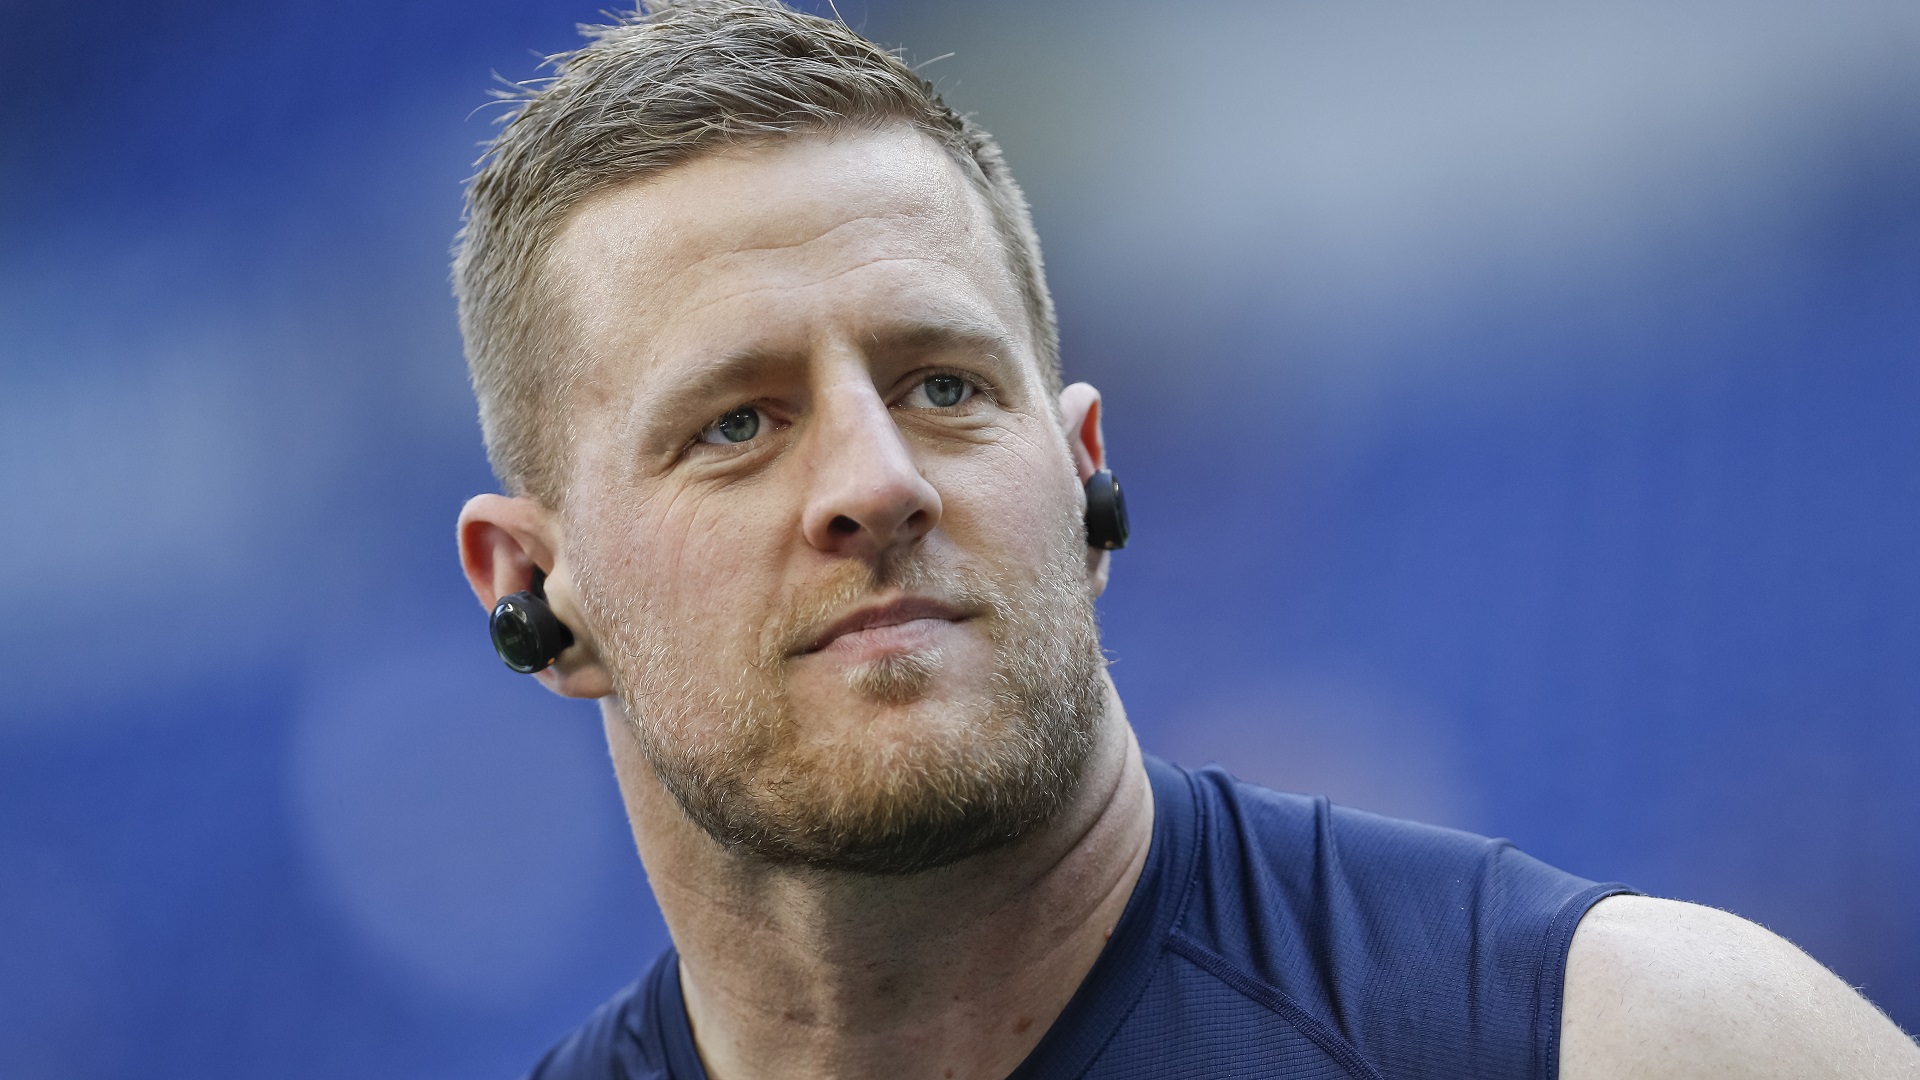 JJ Watt releases his phone number to fans